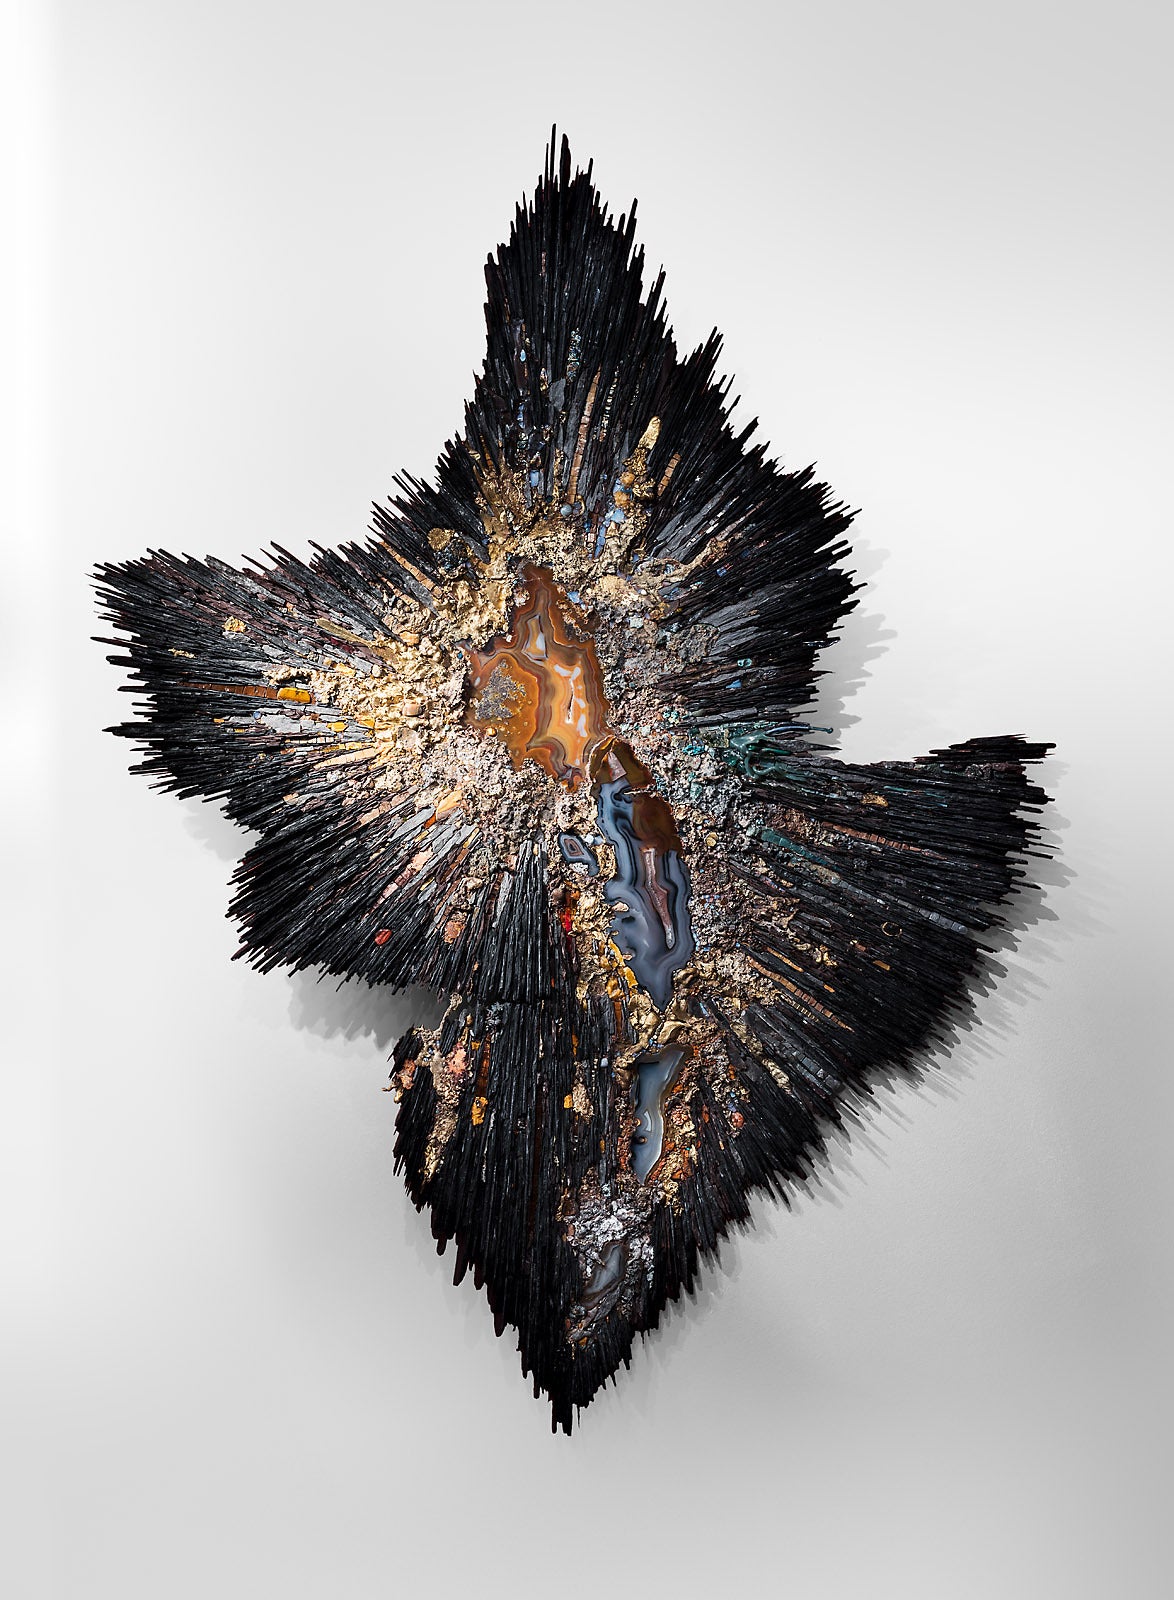 Béatrice Serre 2015, Wall Sculpture « Big Bang  » Black  and Grey  Slate, Golden Enamels, Silver Enamels, Opal, Bronze, Brass, Copper, Agates, Tiger Eye,  Gold, Chrysocolle, Murano Glass, Opaline, 143 X 110 cm, Dated and signed, Unique